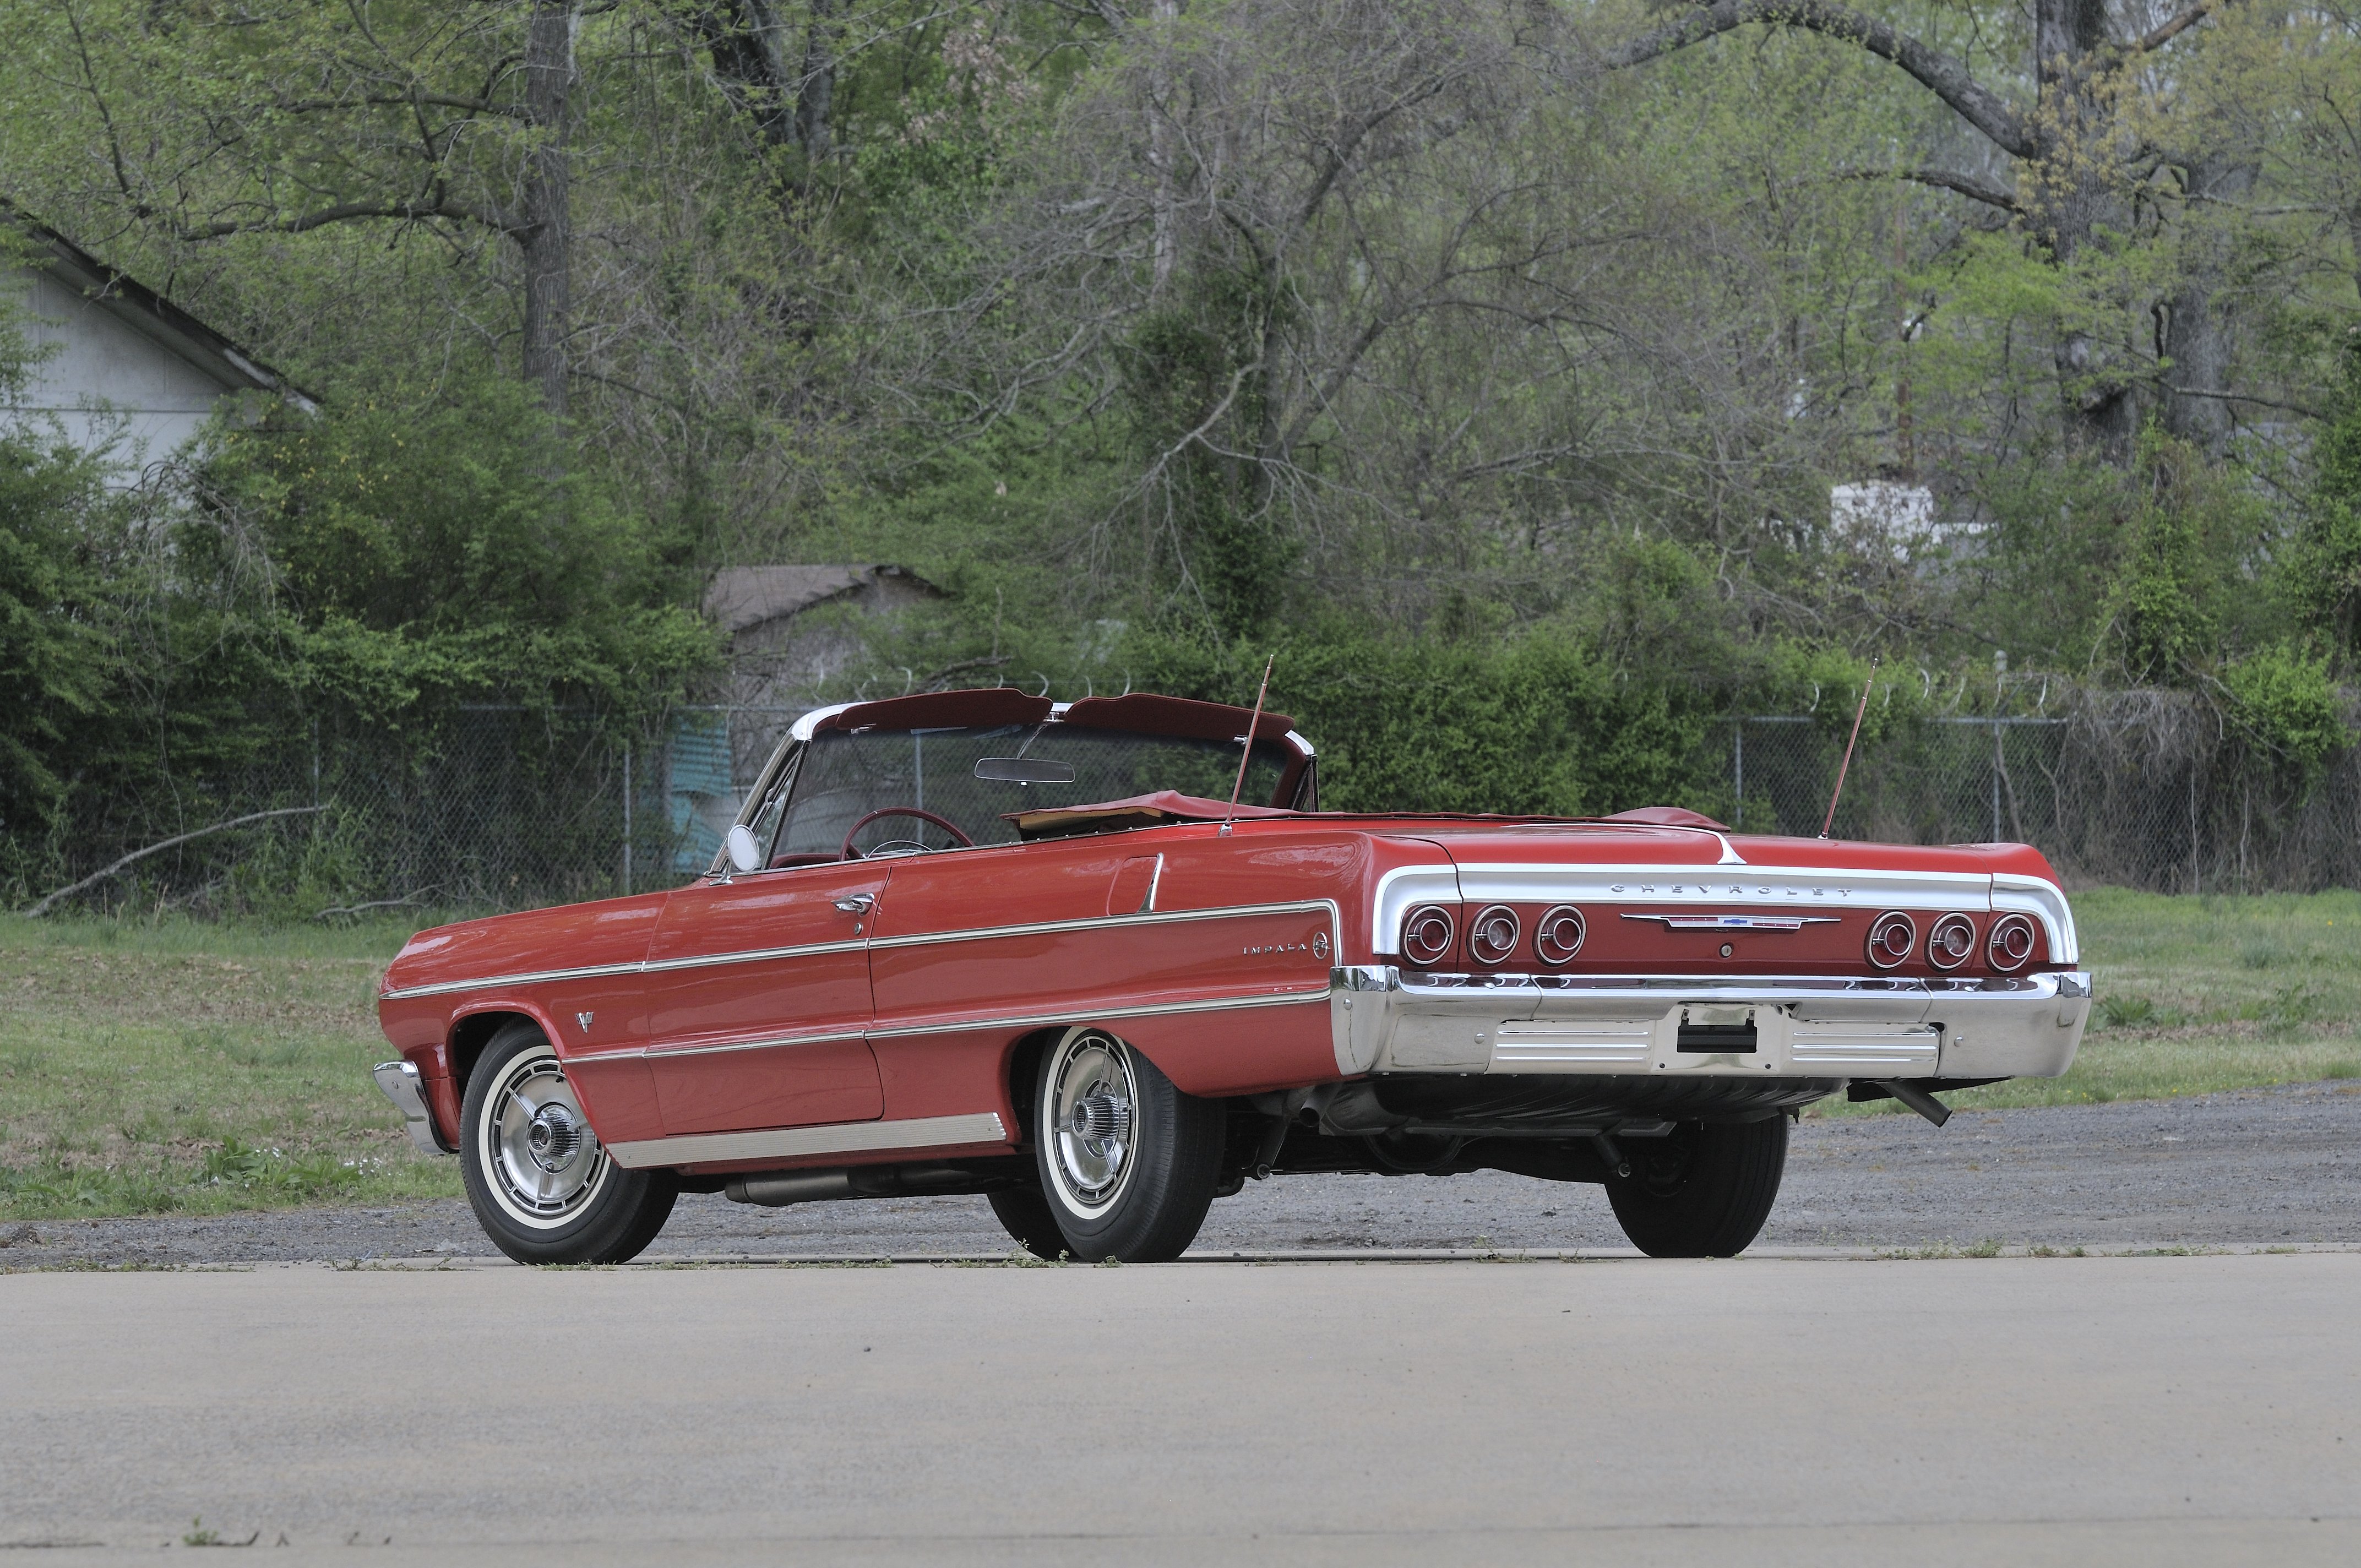 1964, Chevrolet, Impala, Ss, Convertible, Red, Classic old, Usa, 4288x2848 03 Wallpaper